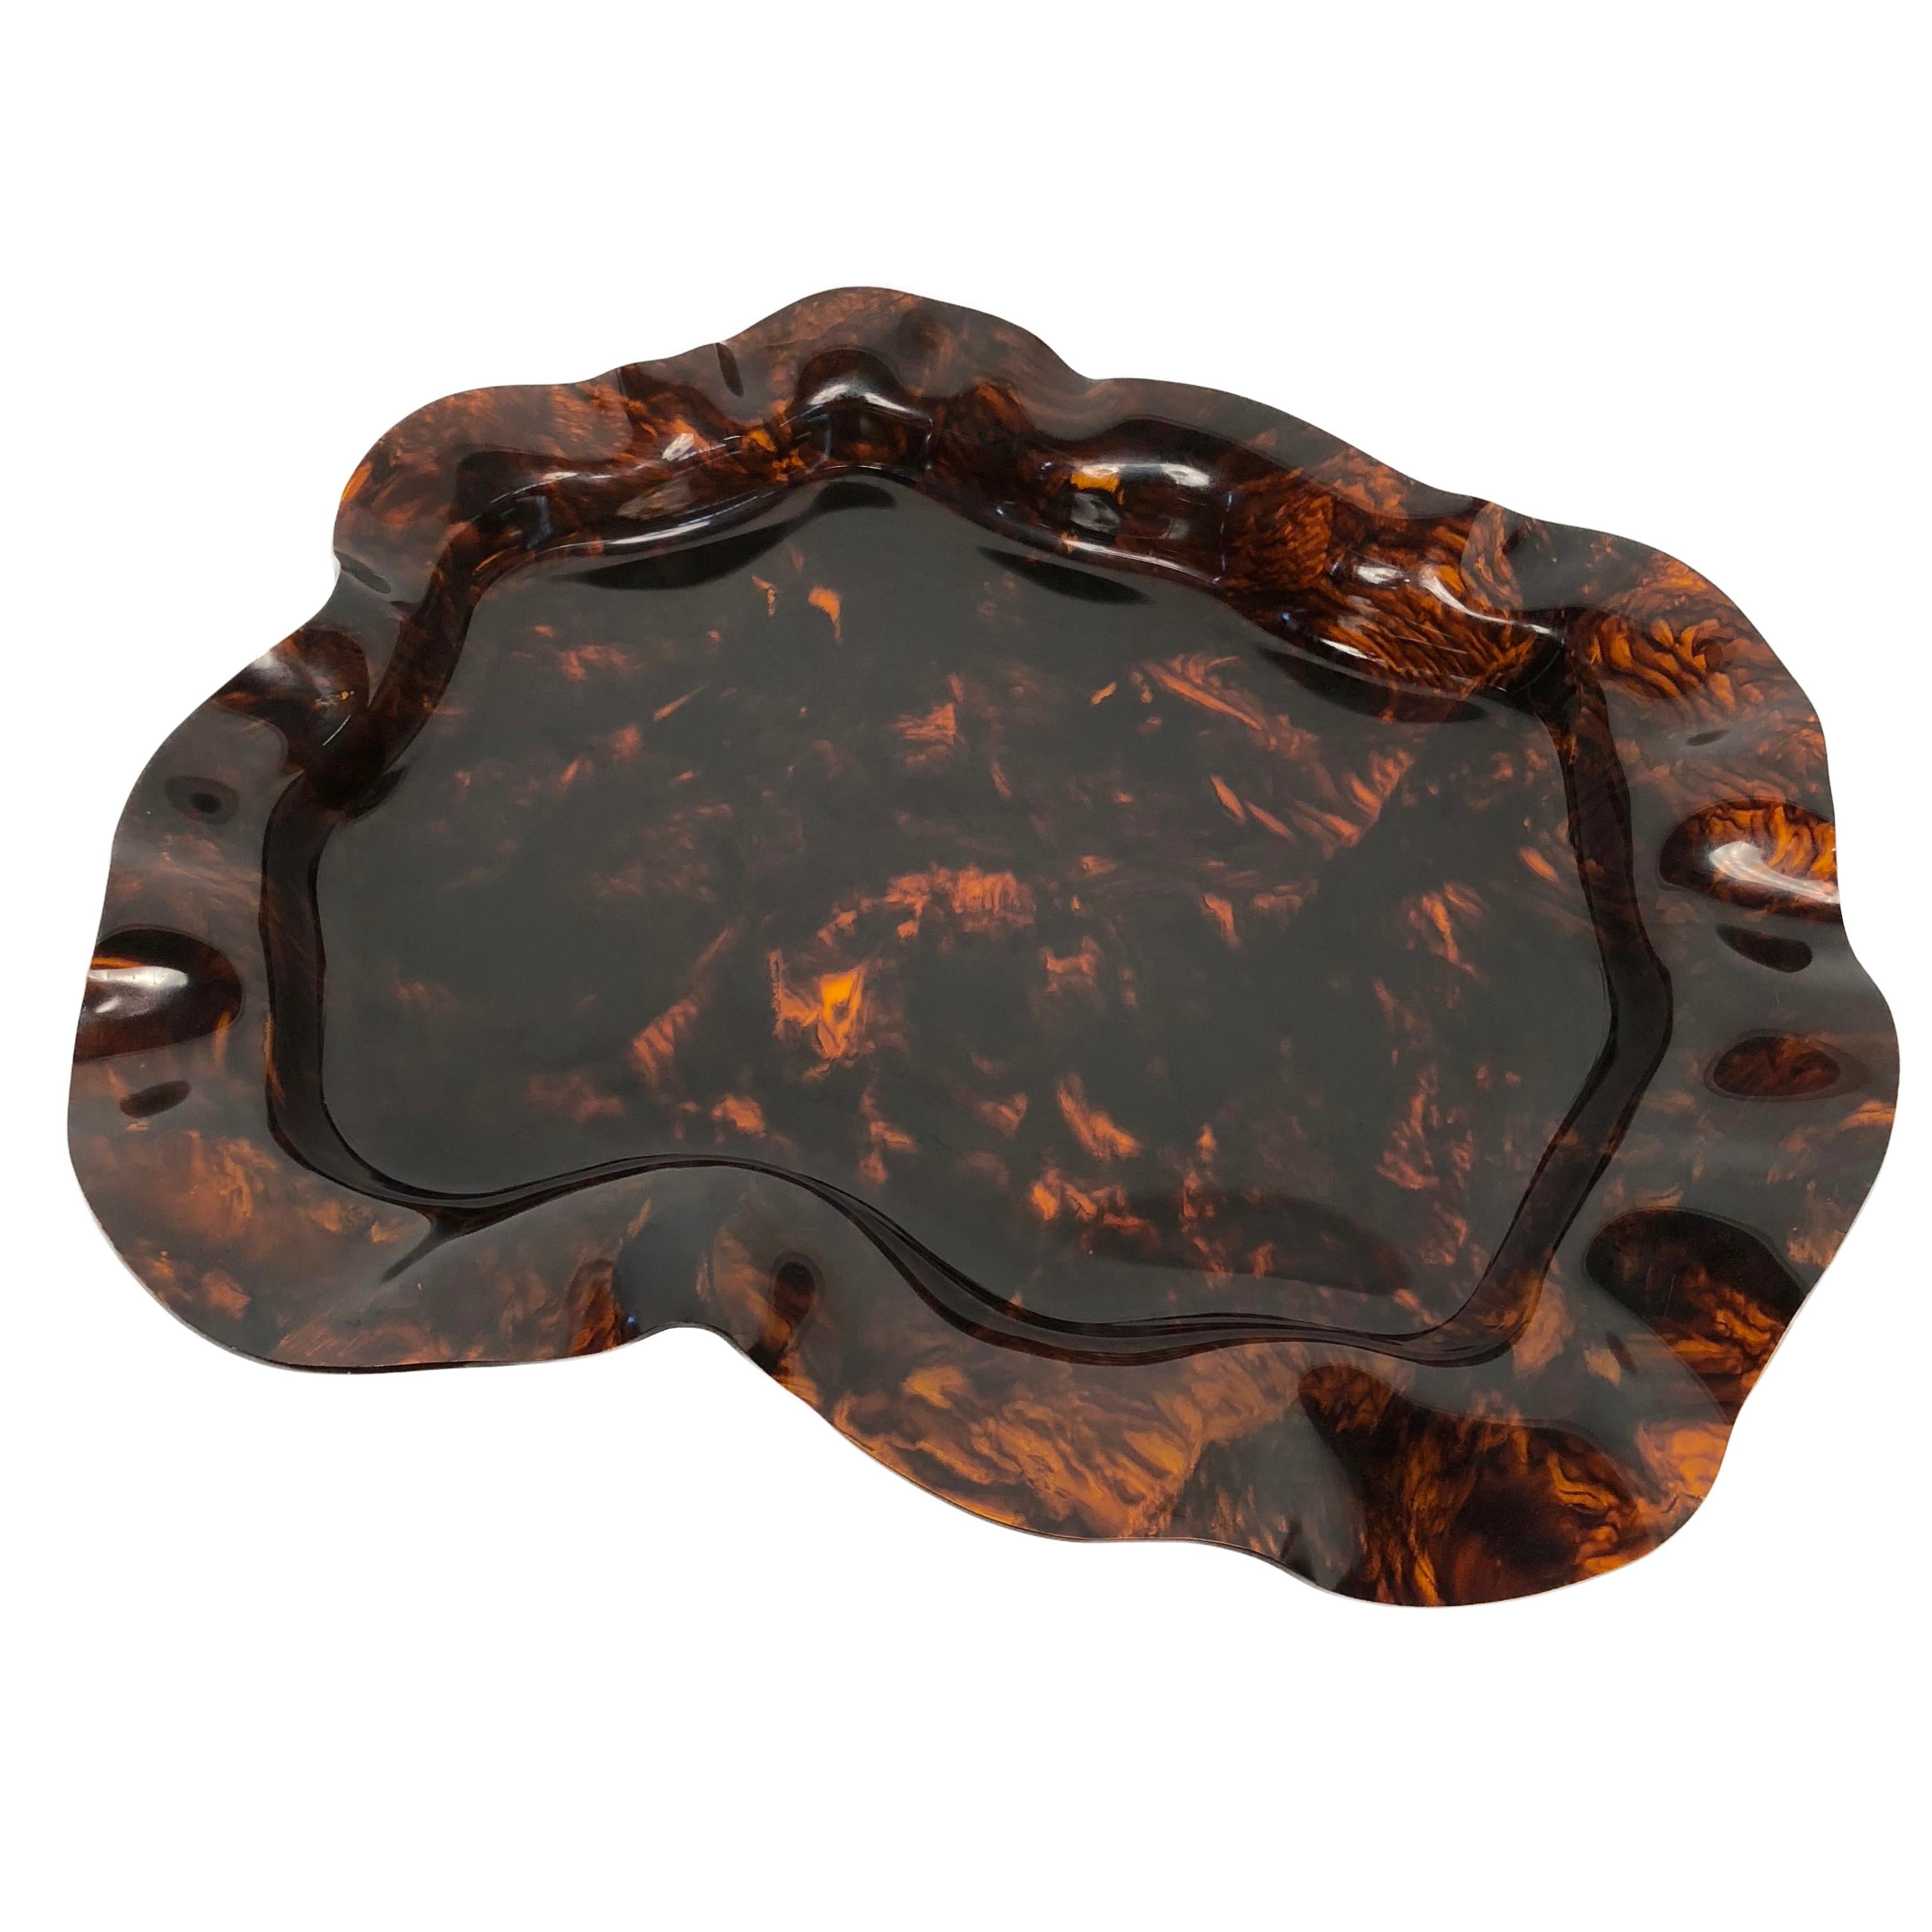 Huge centerpiece made of Lucite in an elegant tortoise model that matches perfectly with his wavy shape.